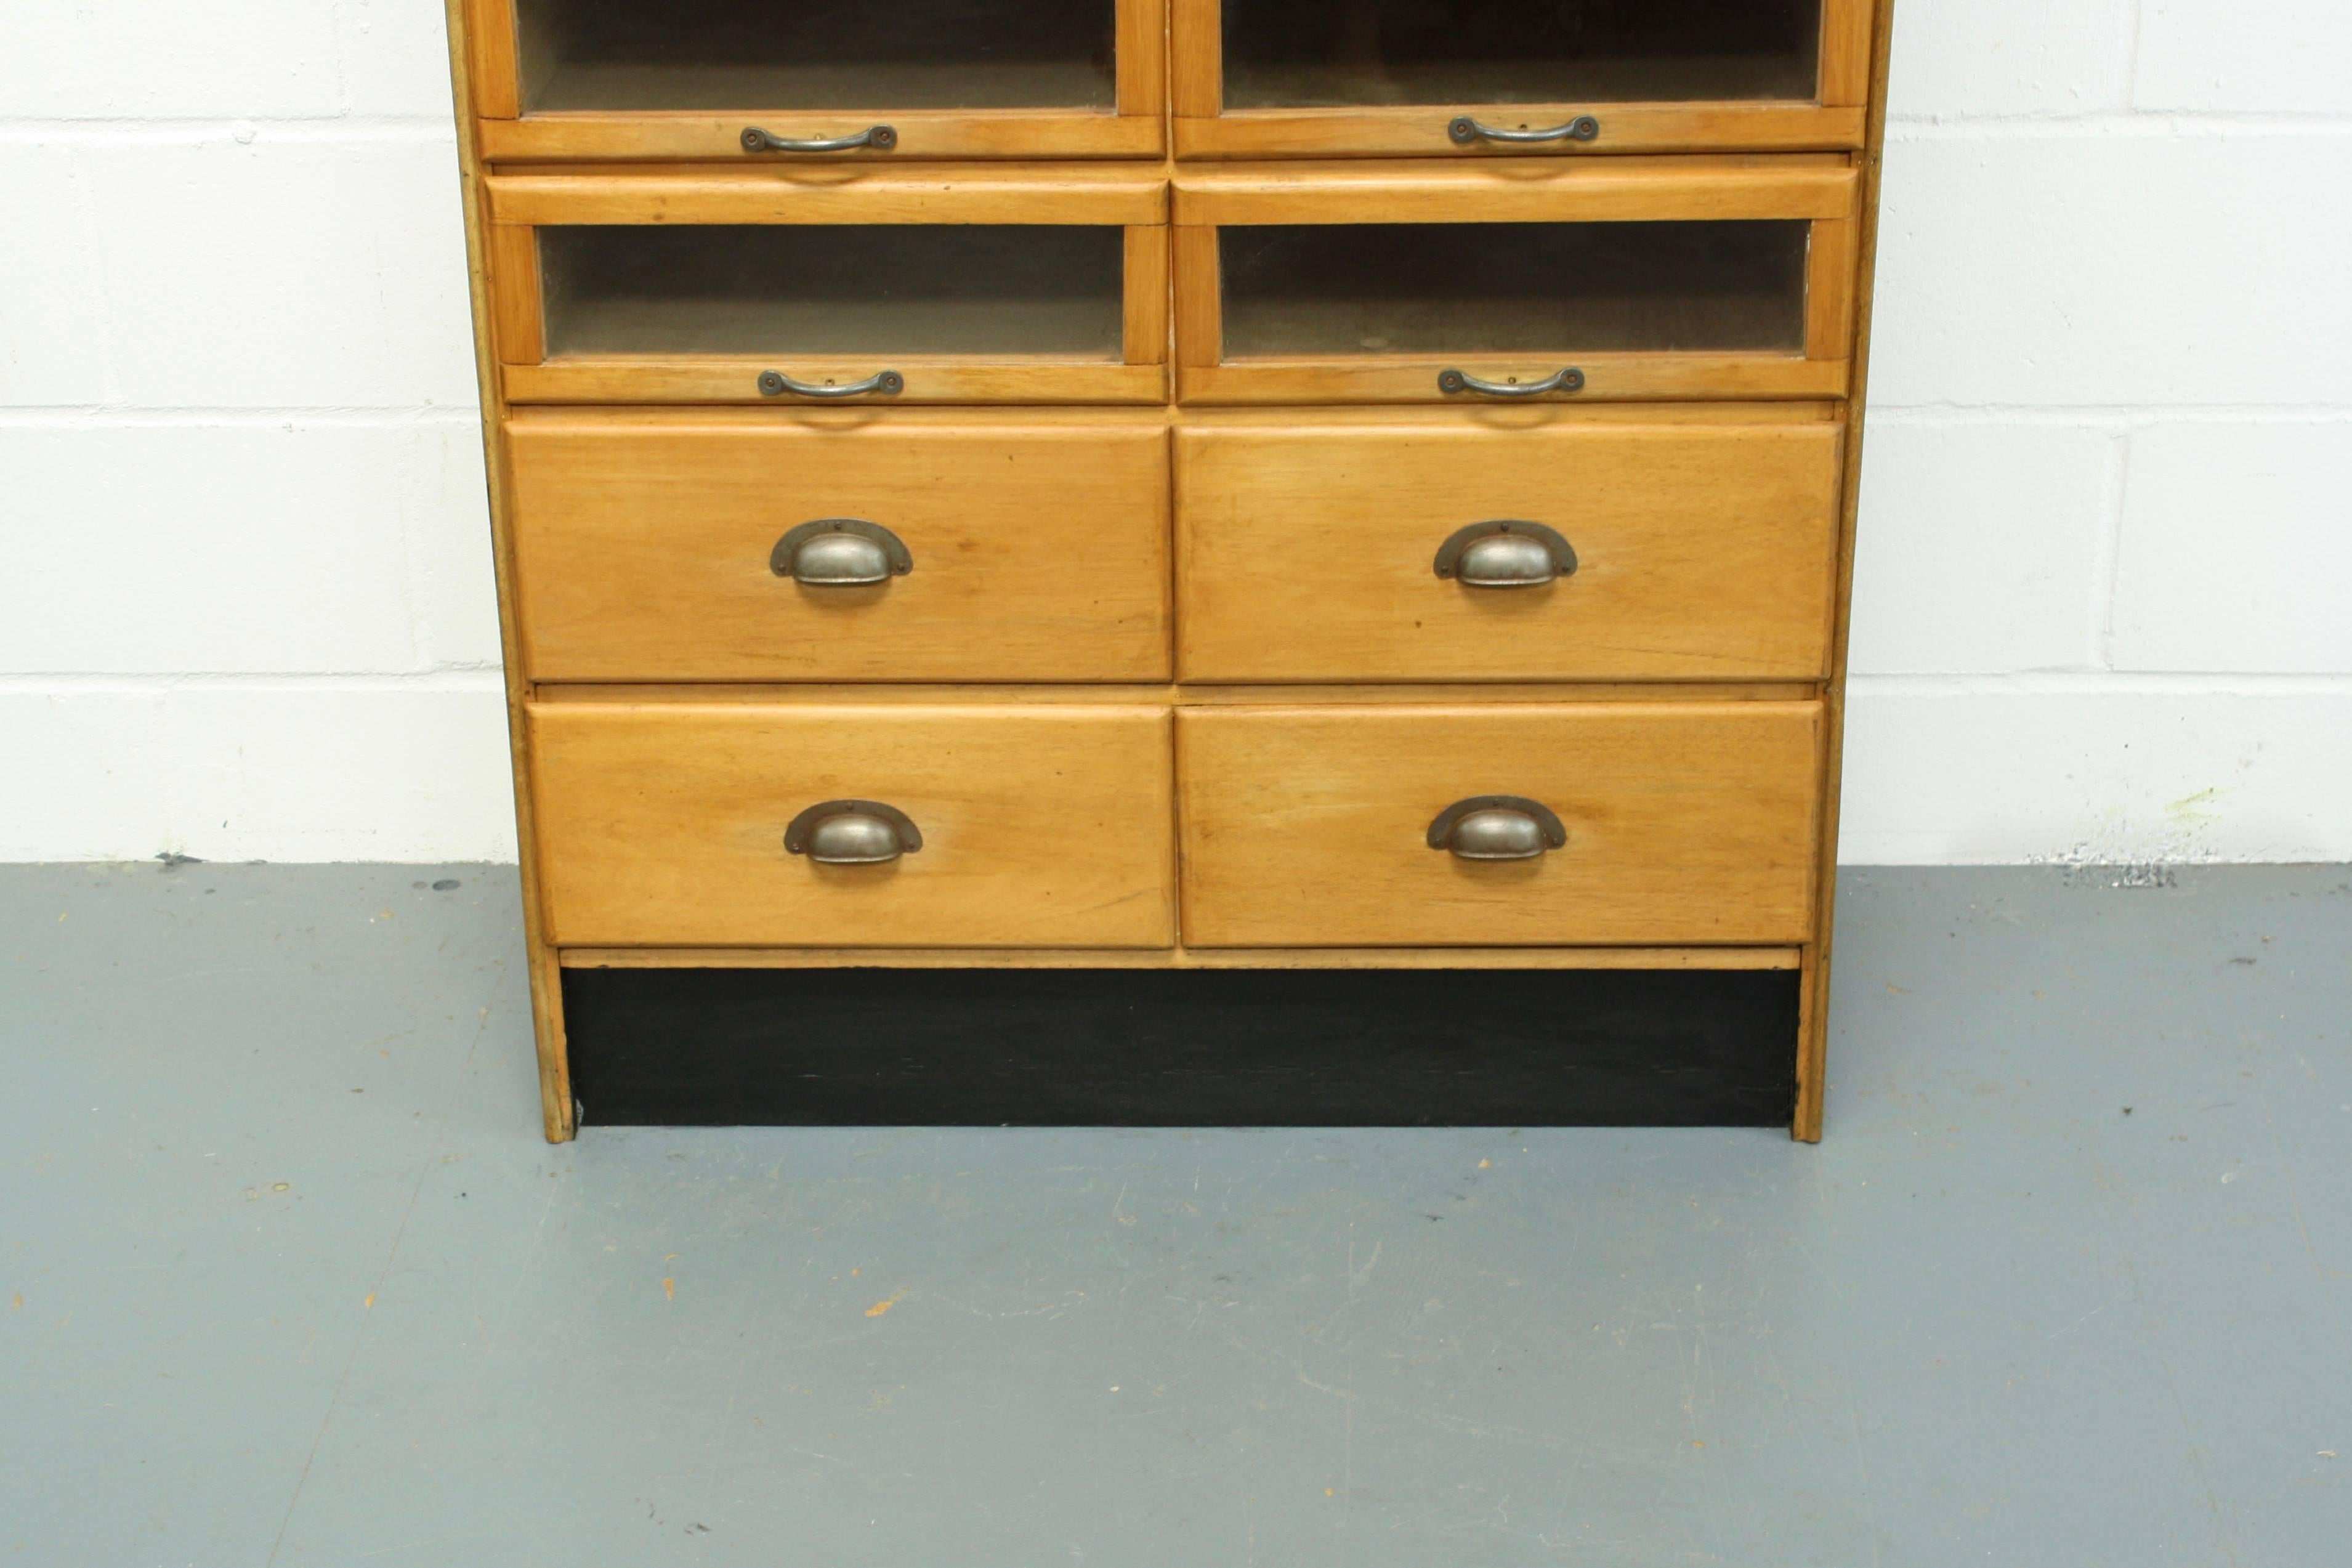 Lovely vintage 20 drawer haberdashery shop cabinet from the early part of the last century.

It has 16 glass fronted drawers and four solid wood base drawers, all with metal handles.

In good vintage condition. Some scuffs here and there,